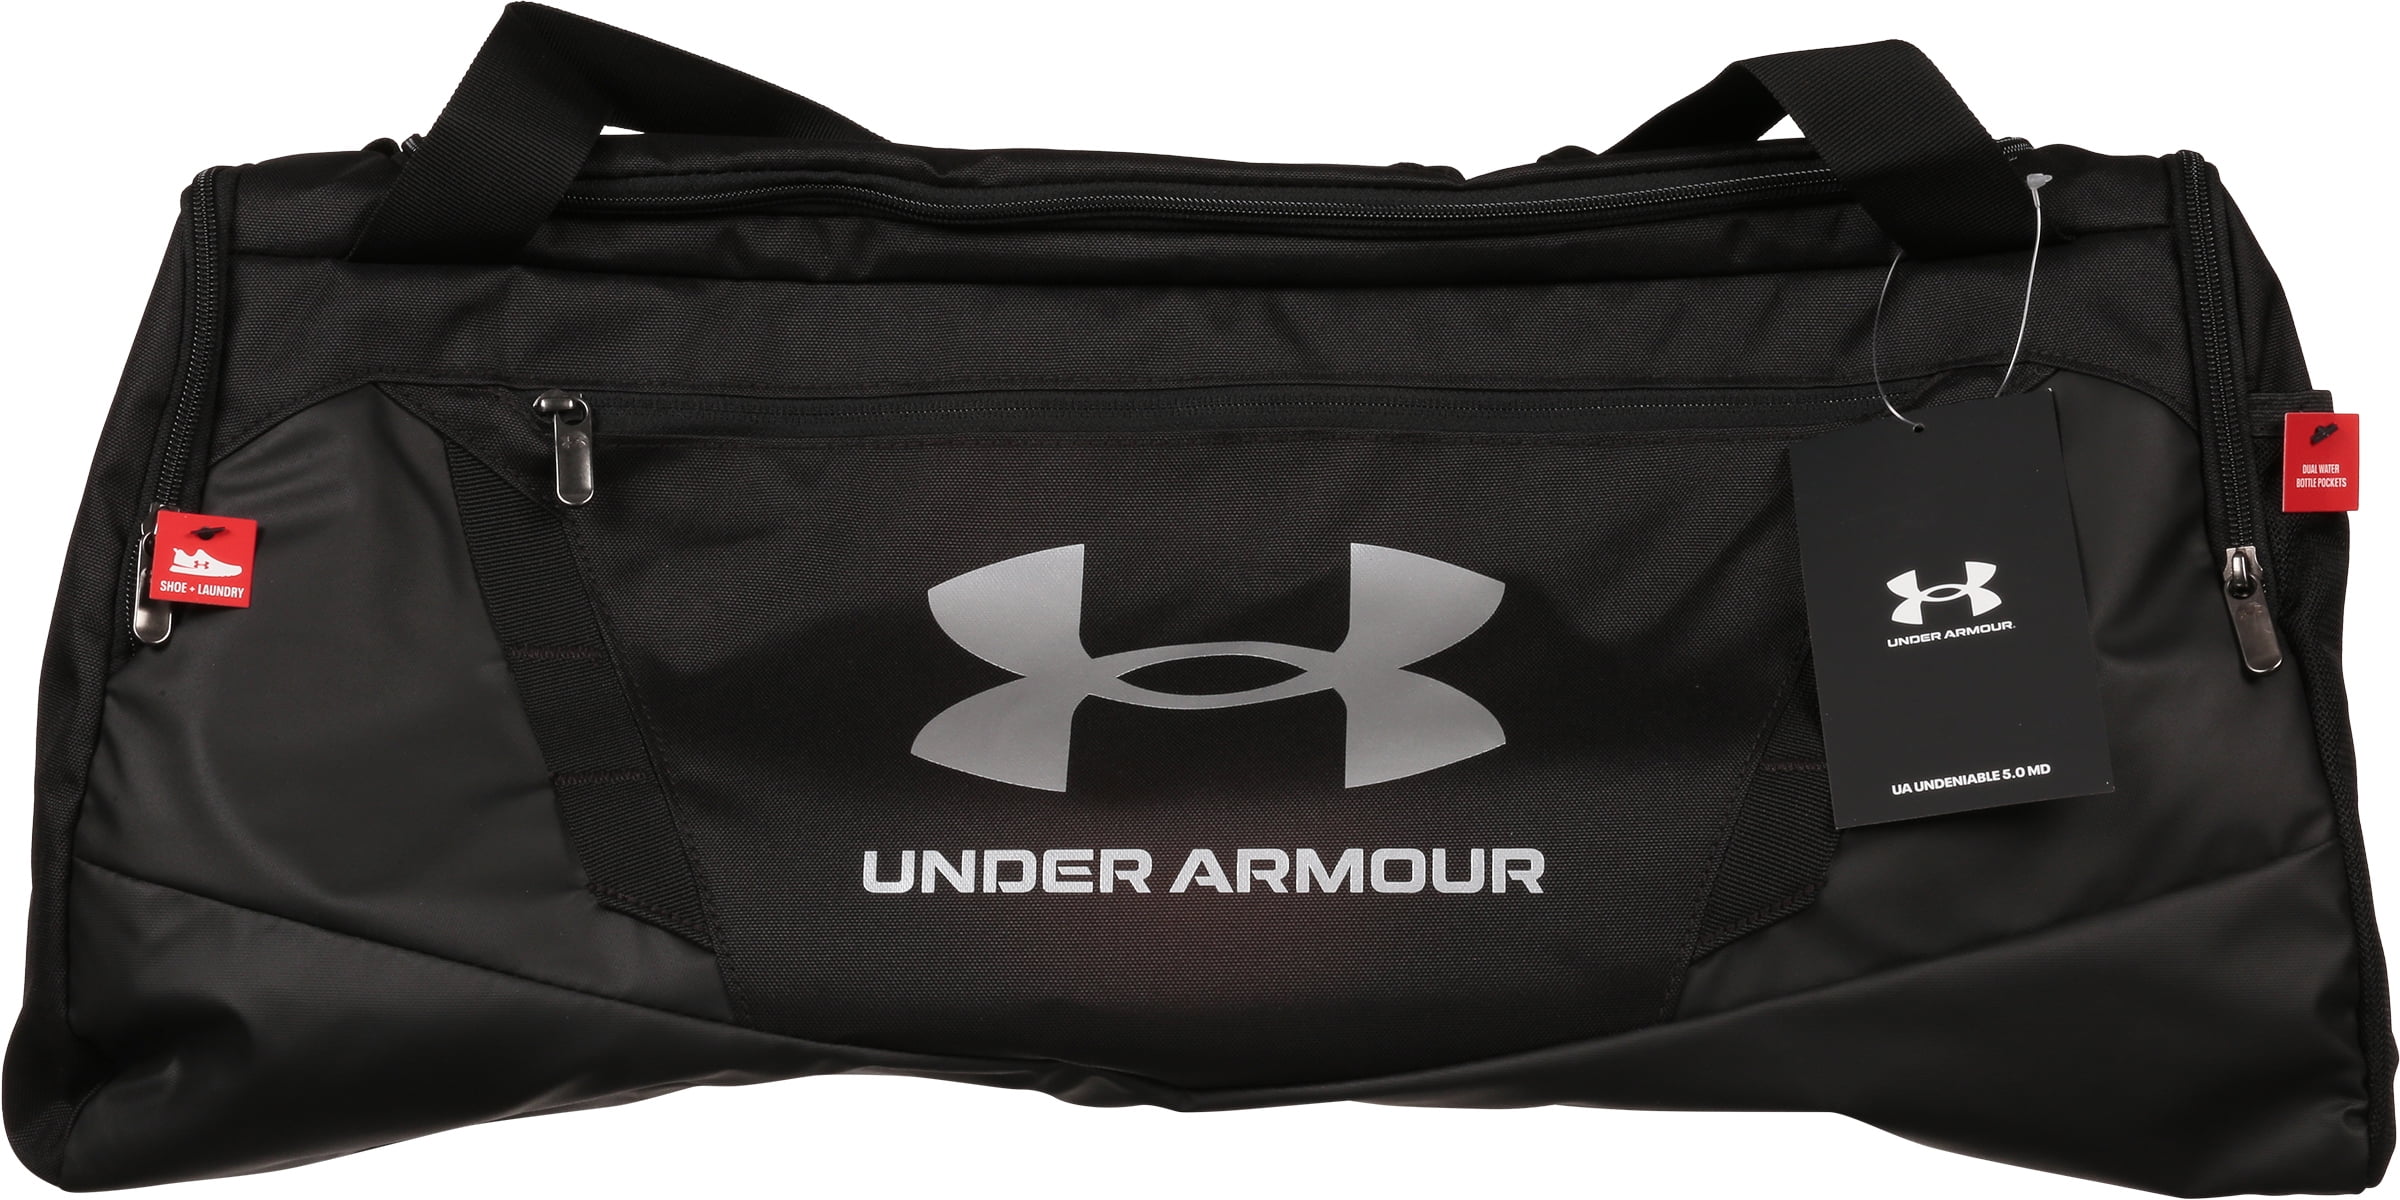 Under Armour Undeniable 5.0 Duffle Bag in Blue for Men